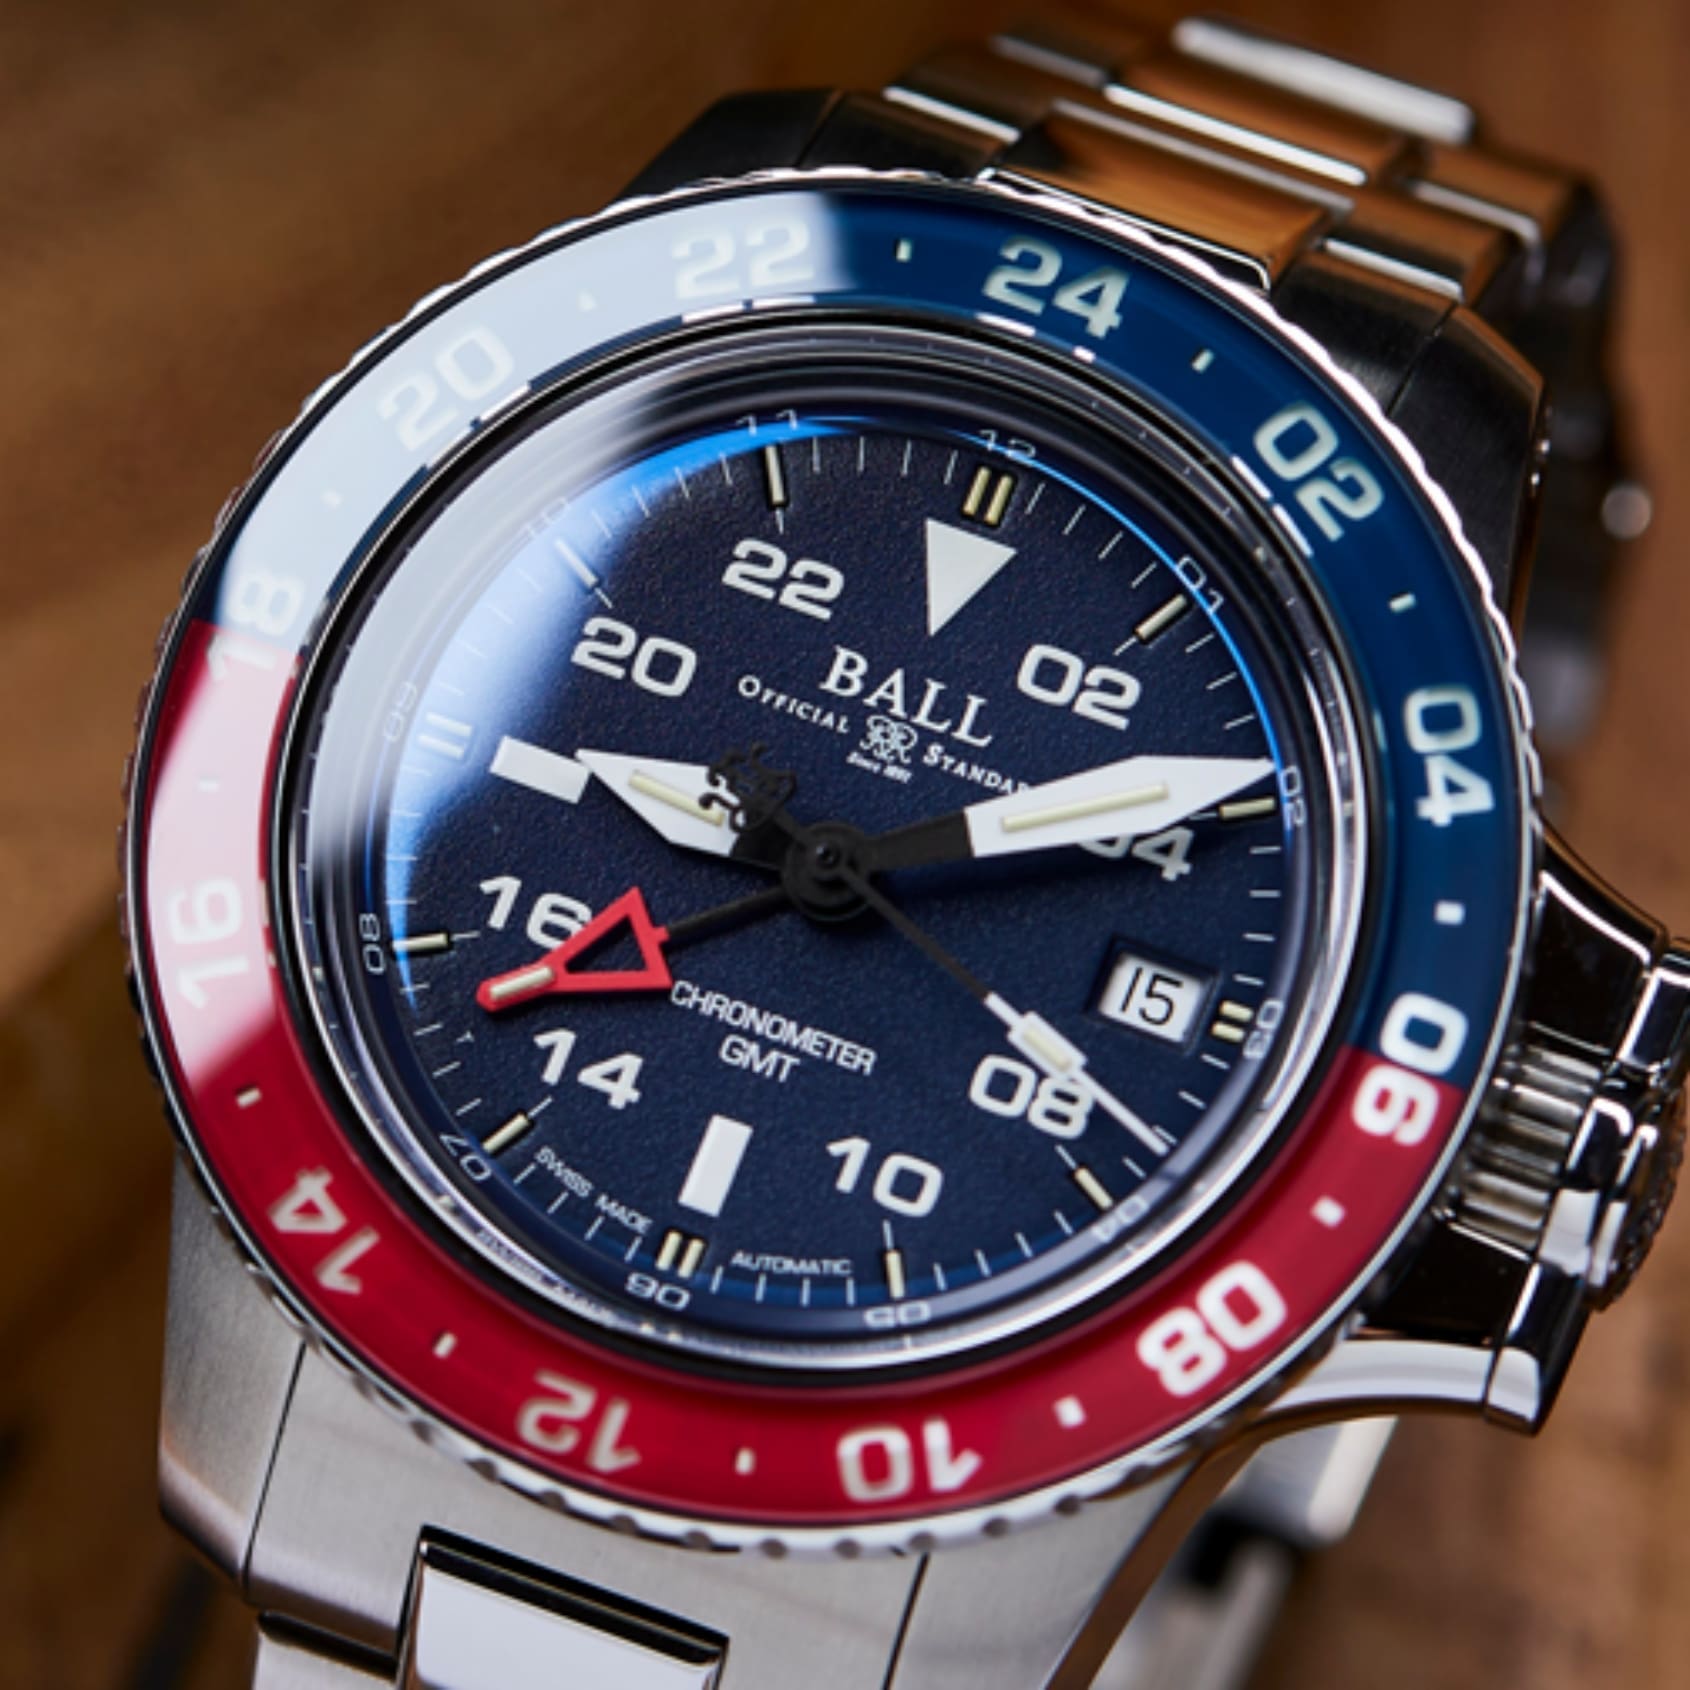 VIDEO: The Ball Engineer Hydrocarbon AeroGMT II is colourful, robust and competitively priced